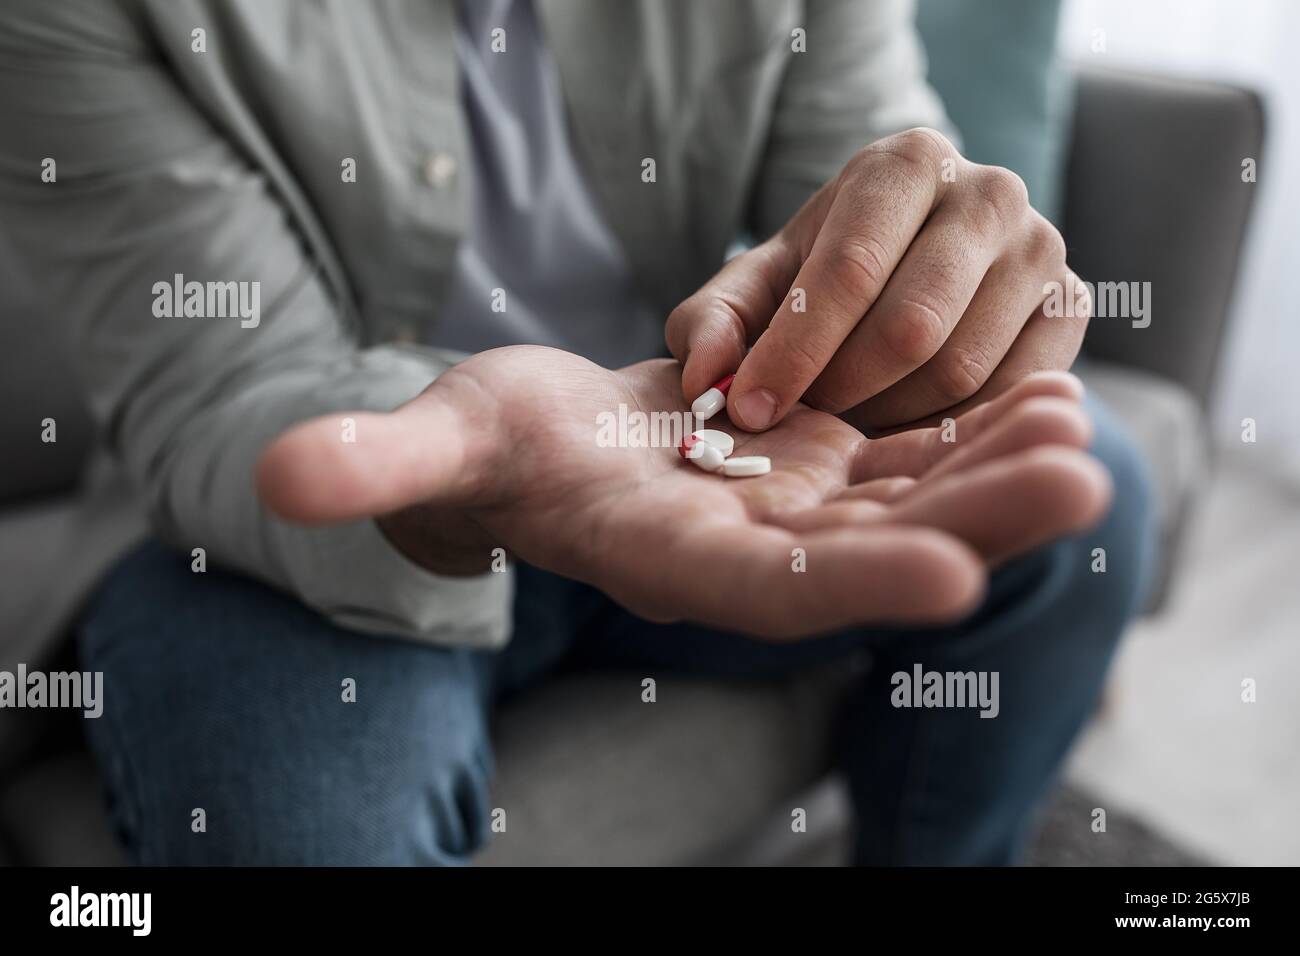 Addiction on pain relievers, mental health problems, antidepressants Stock Photo